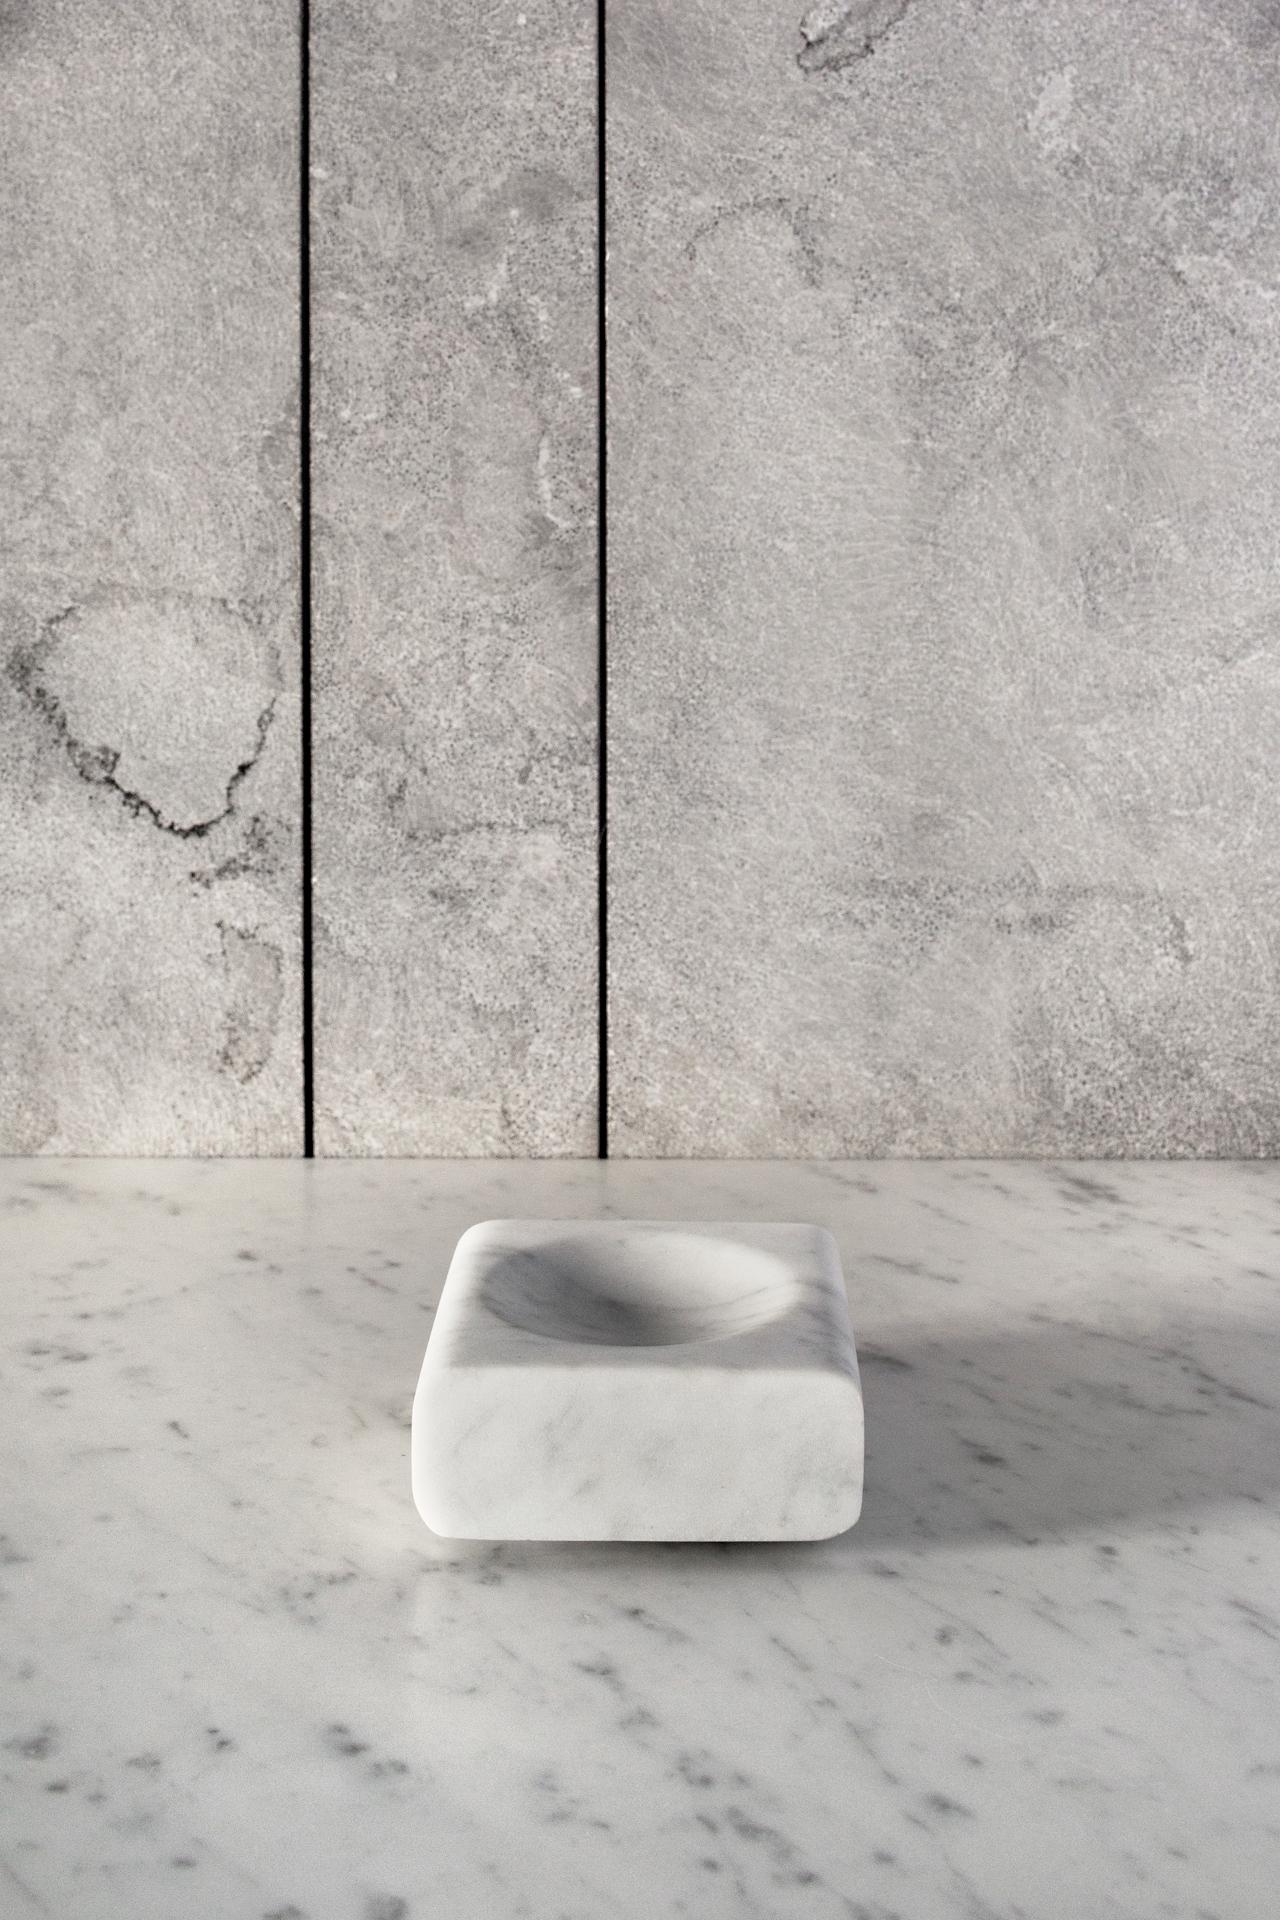 Salvatori together with John Pawson has created the ‘Pillow”, a shallow dish carved from a single piece of Bianco Carrara marble. A small tray for all those loose items which always seem to need a temporary home, such as keys, coins and